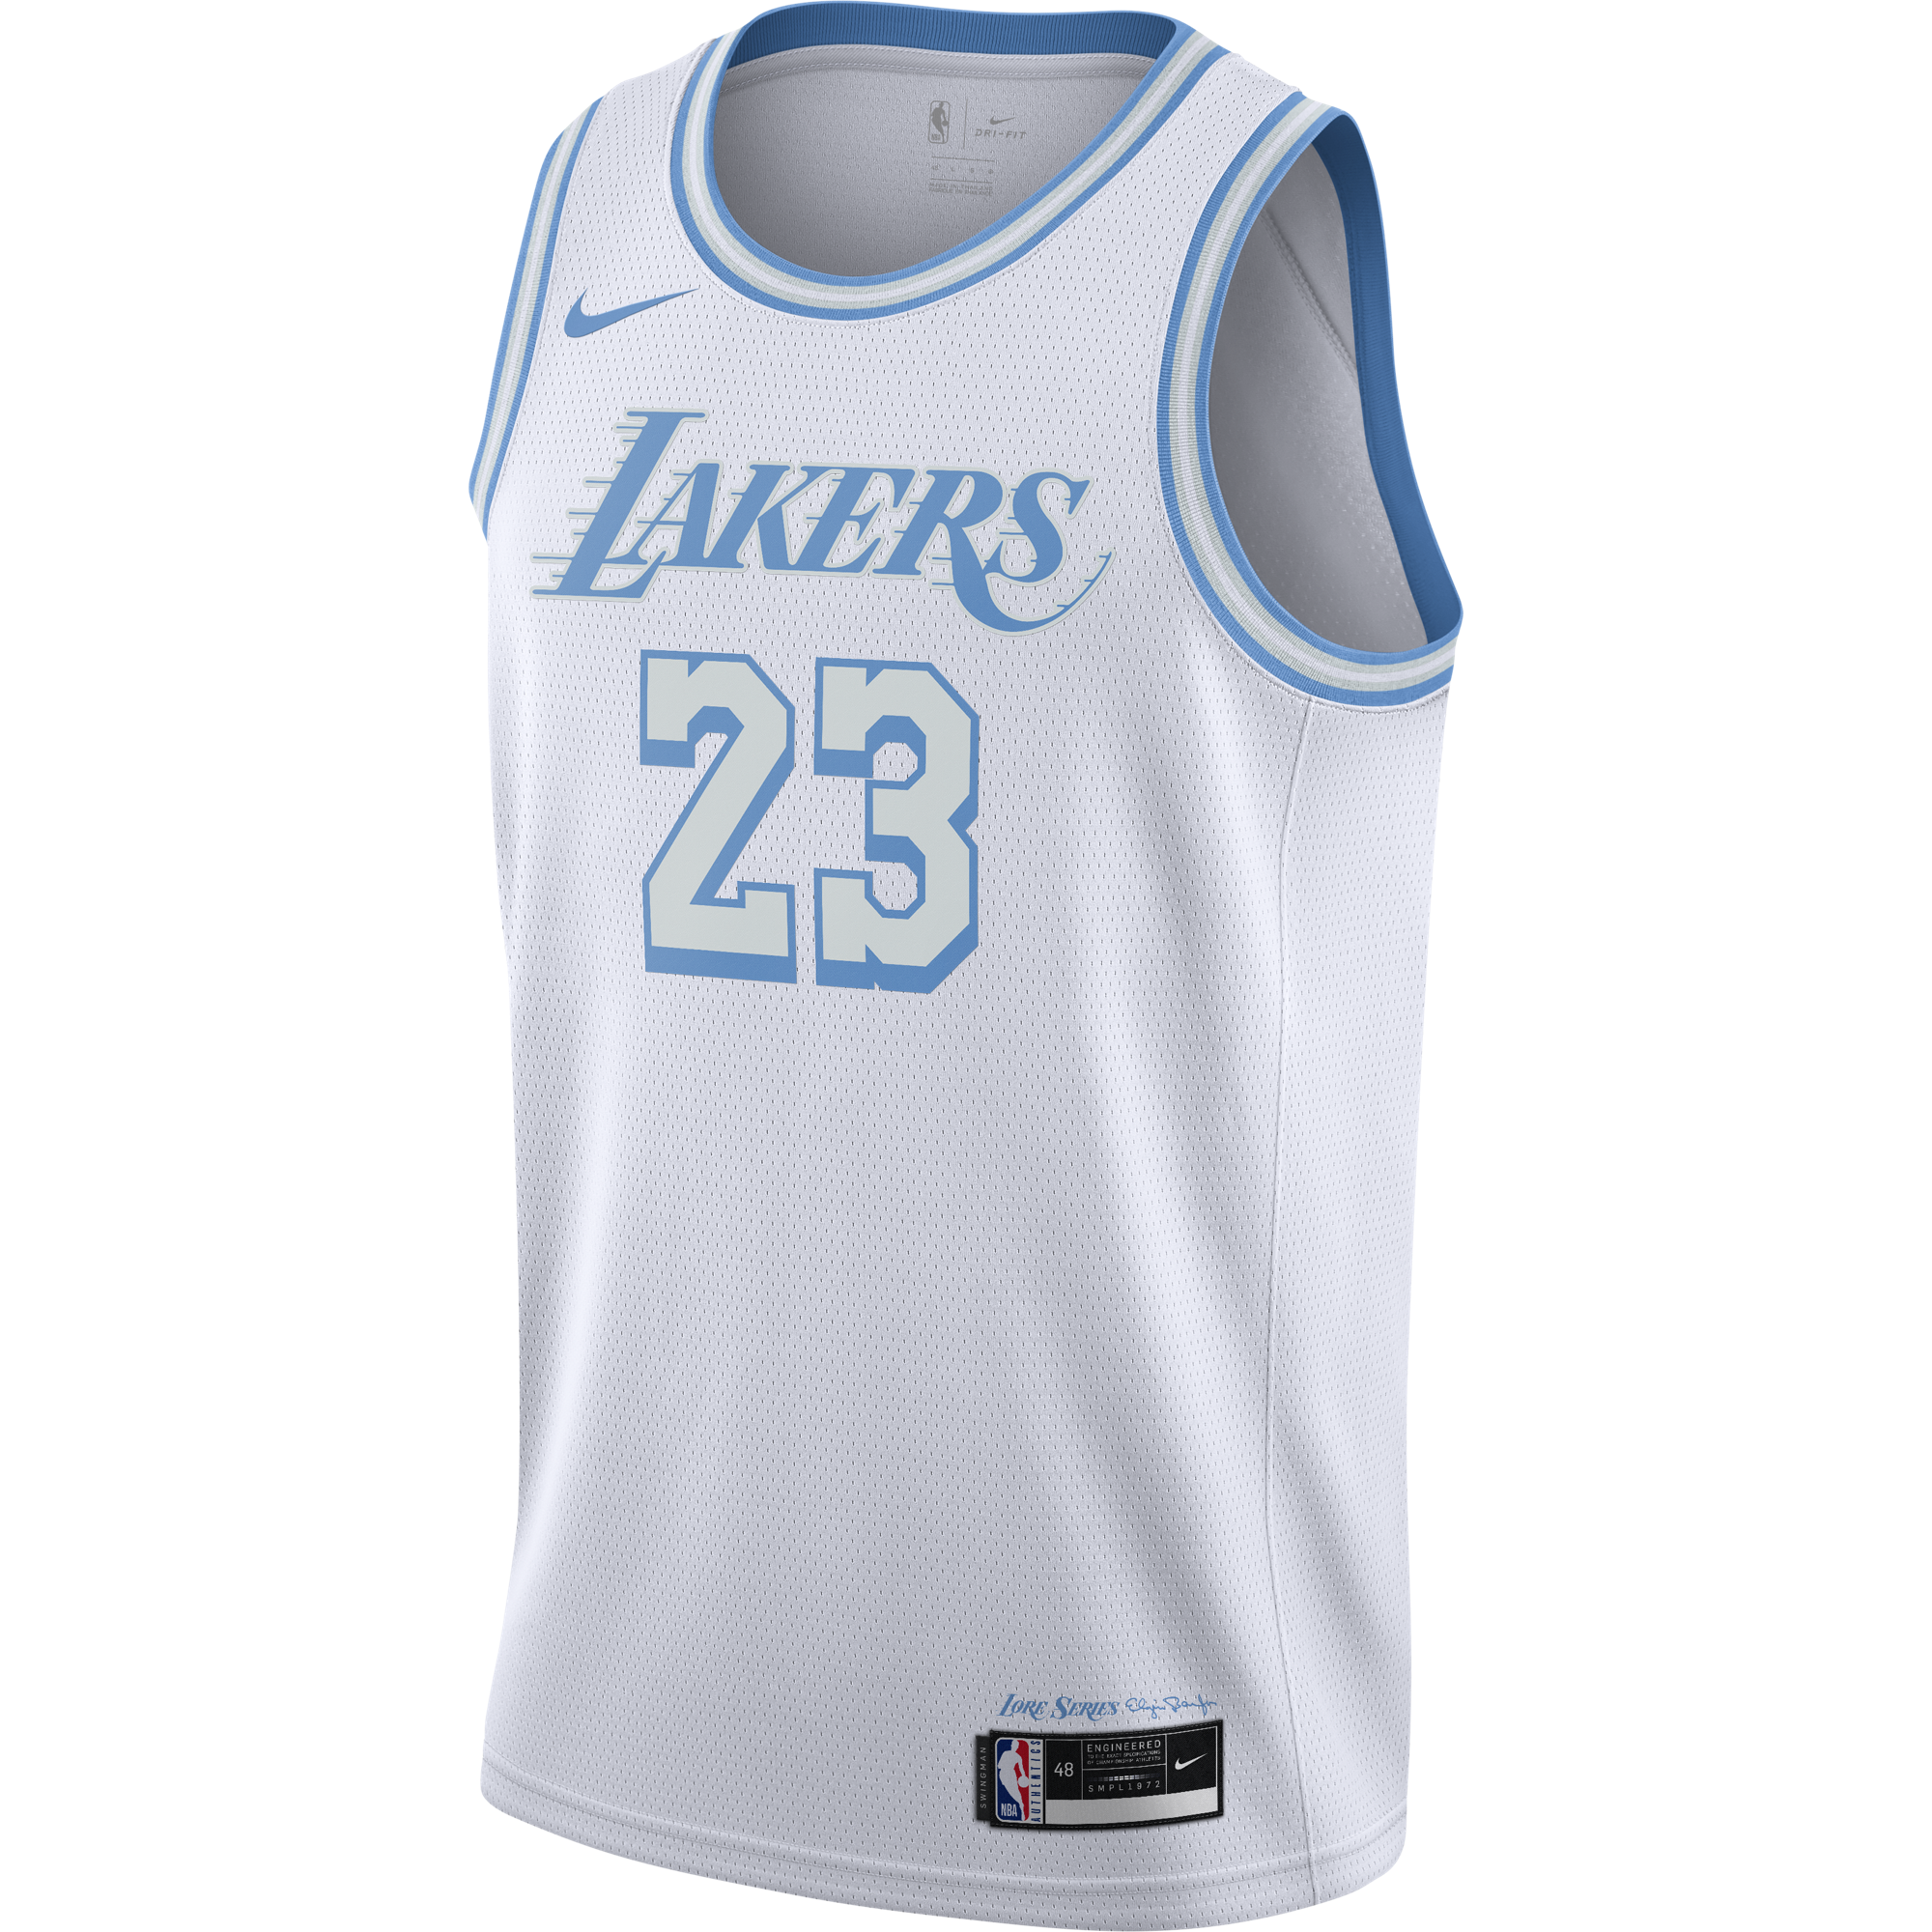 Authentic Lebron James 19/20 City Edition Los Angelos Lakers Jersey 